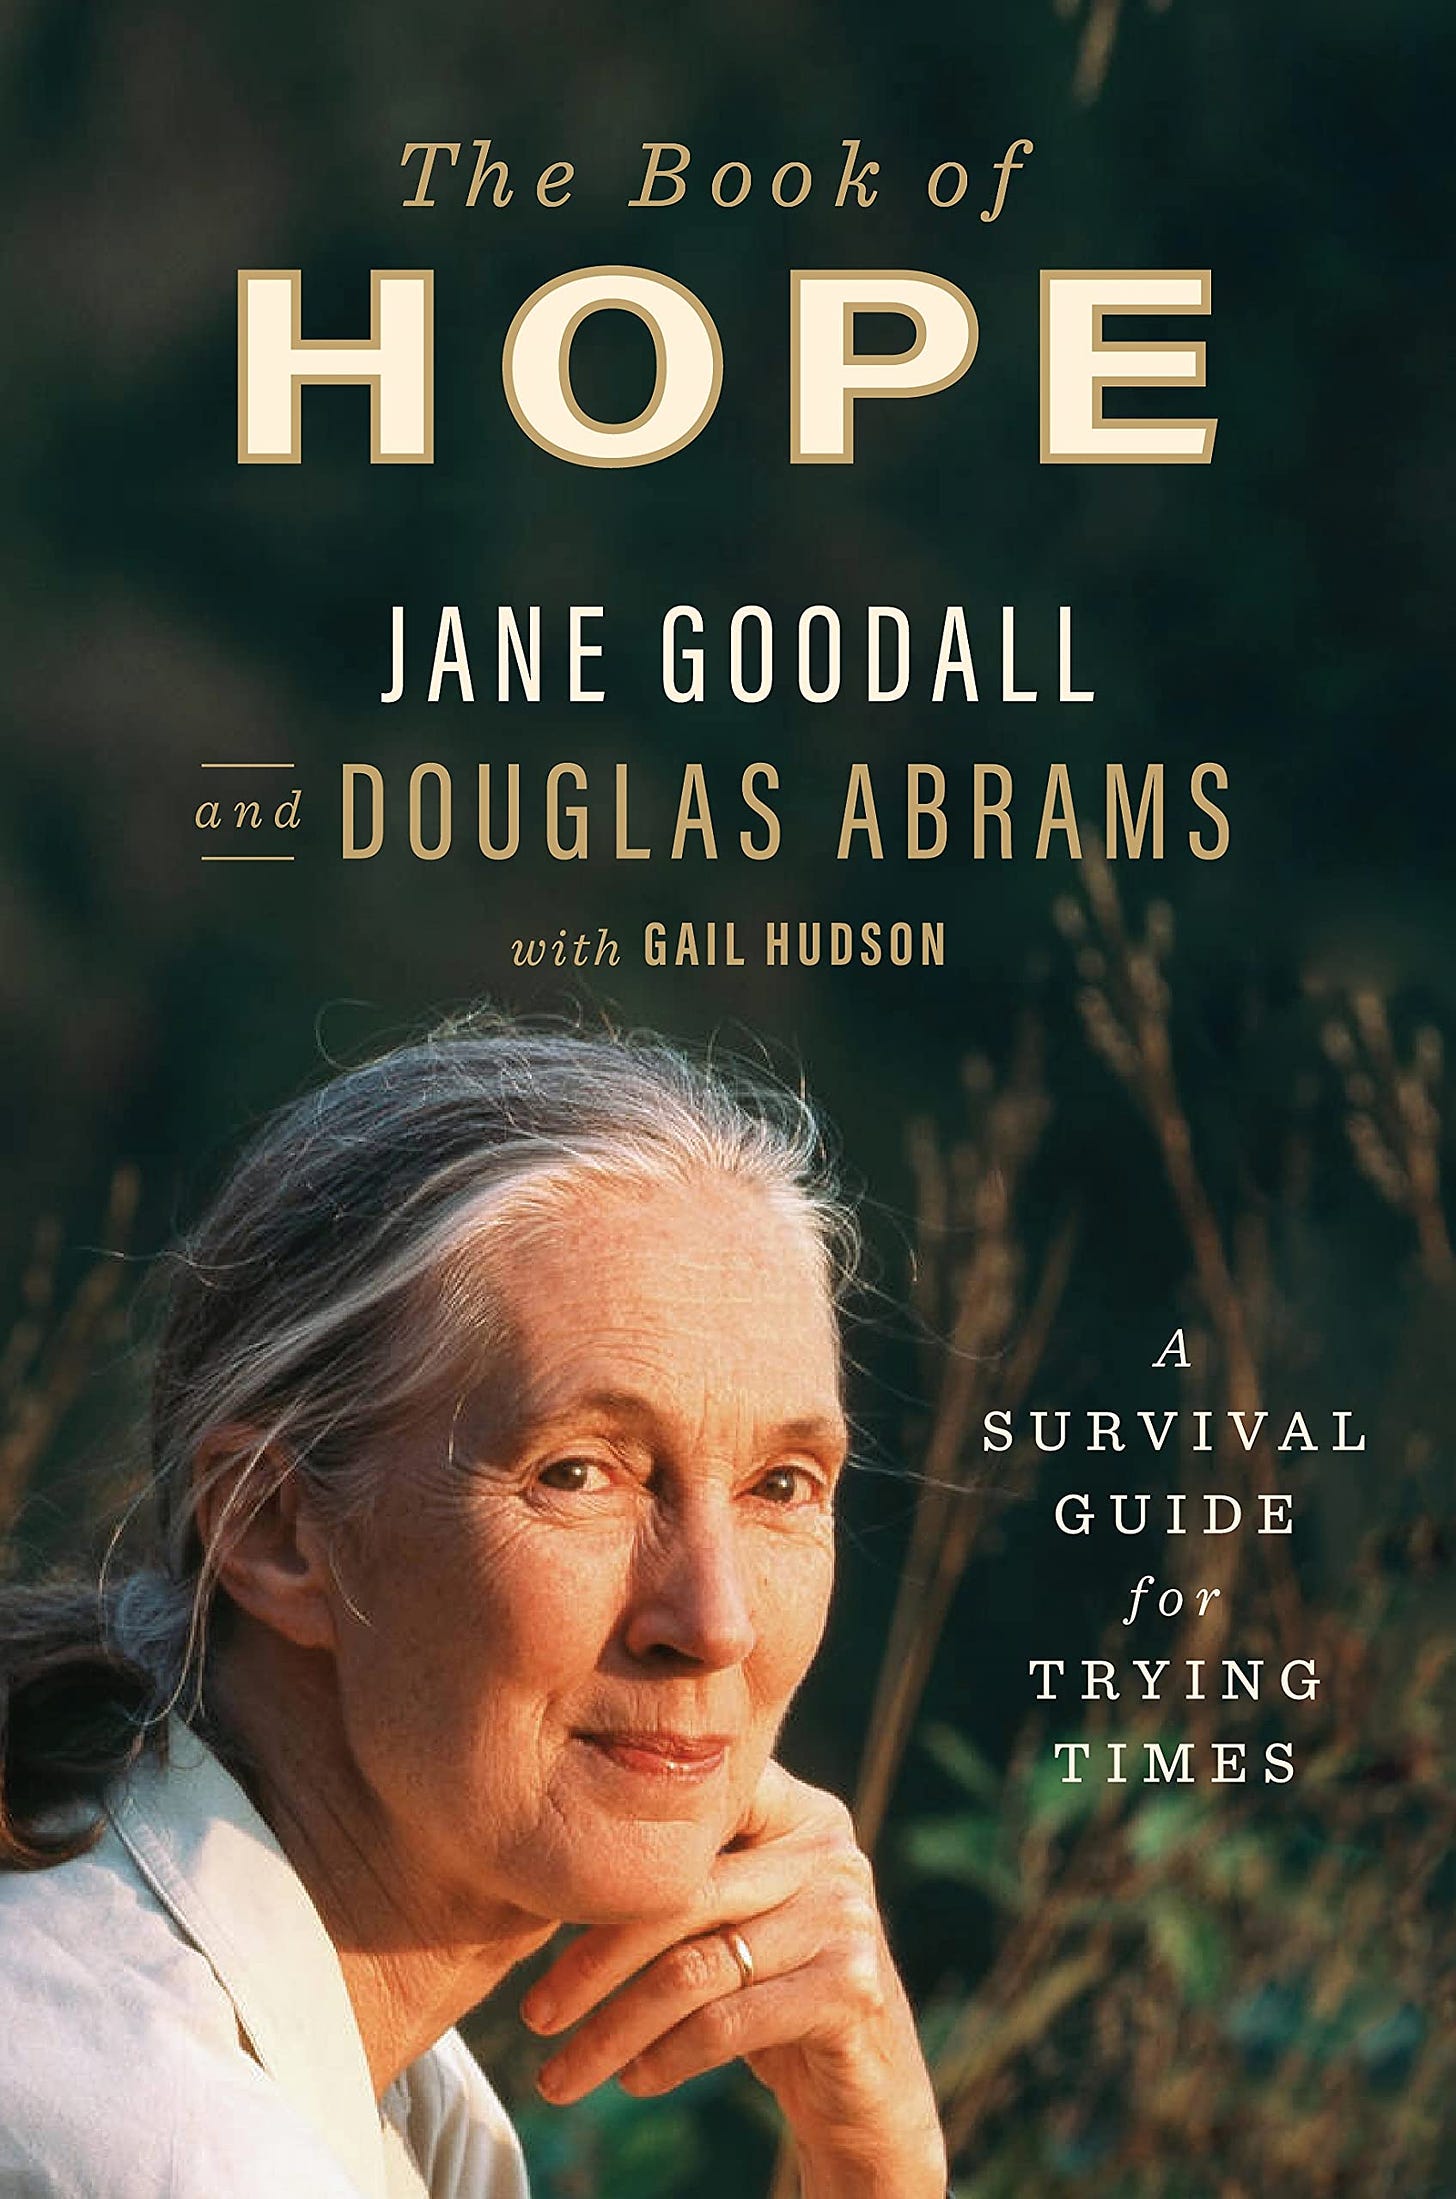 The Book of Hope: A Survival Guide for Trying Times (Global Icons Series) ,  Goodall, Jane, Abrams, Douglas - Amazon.com